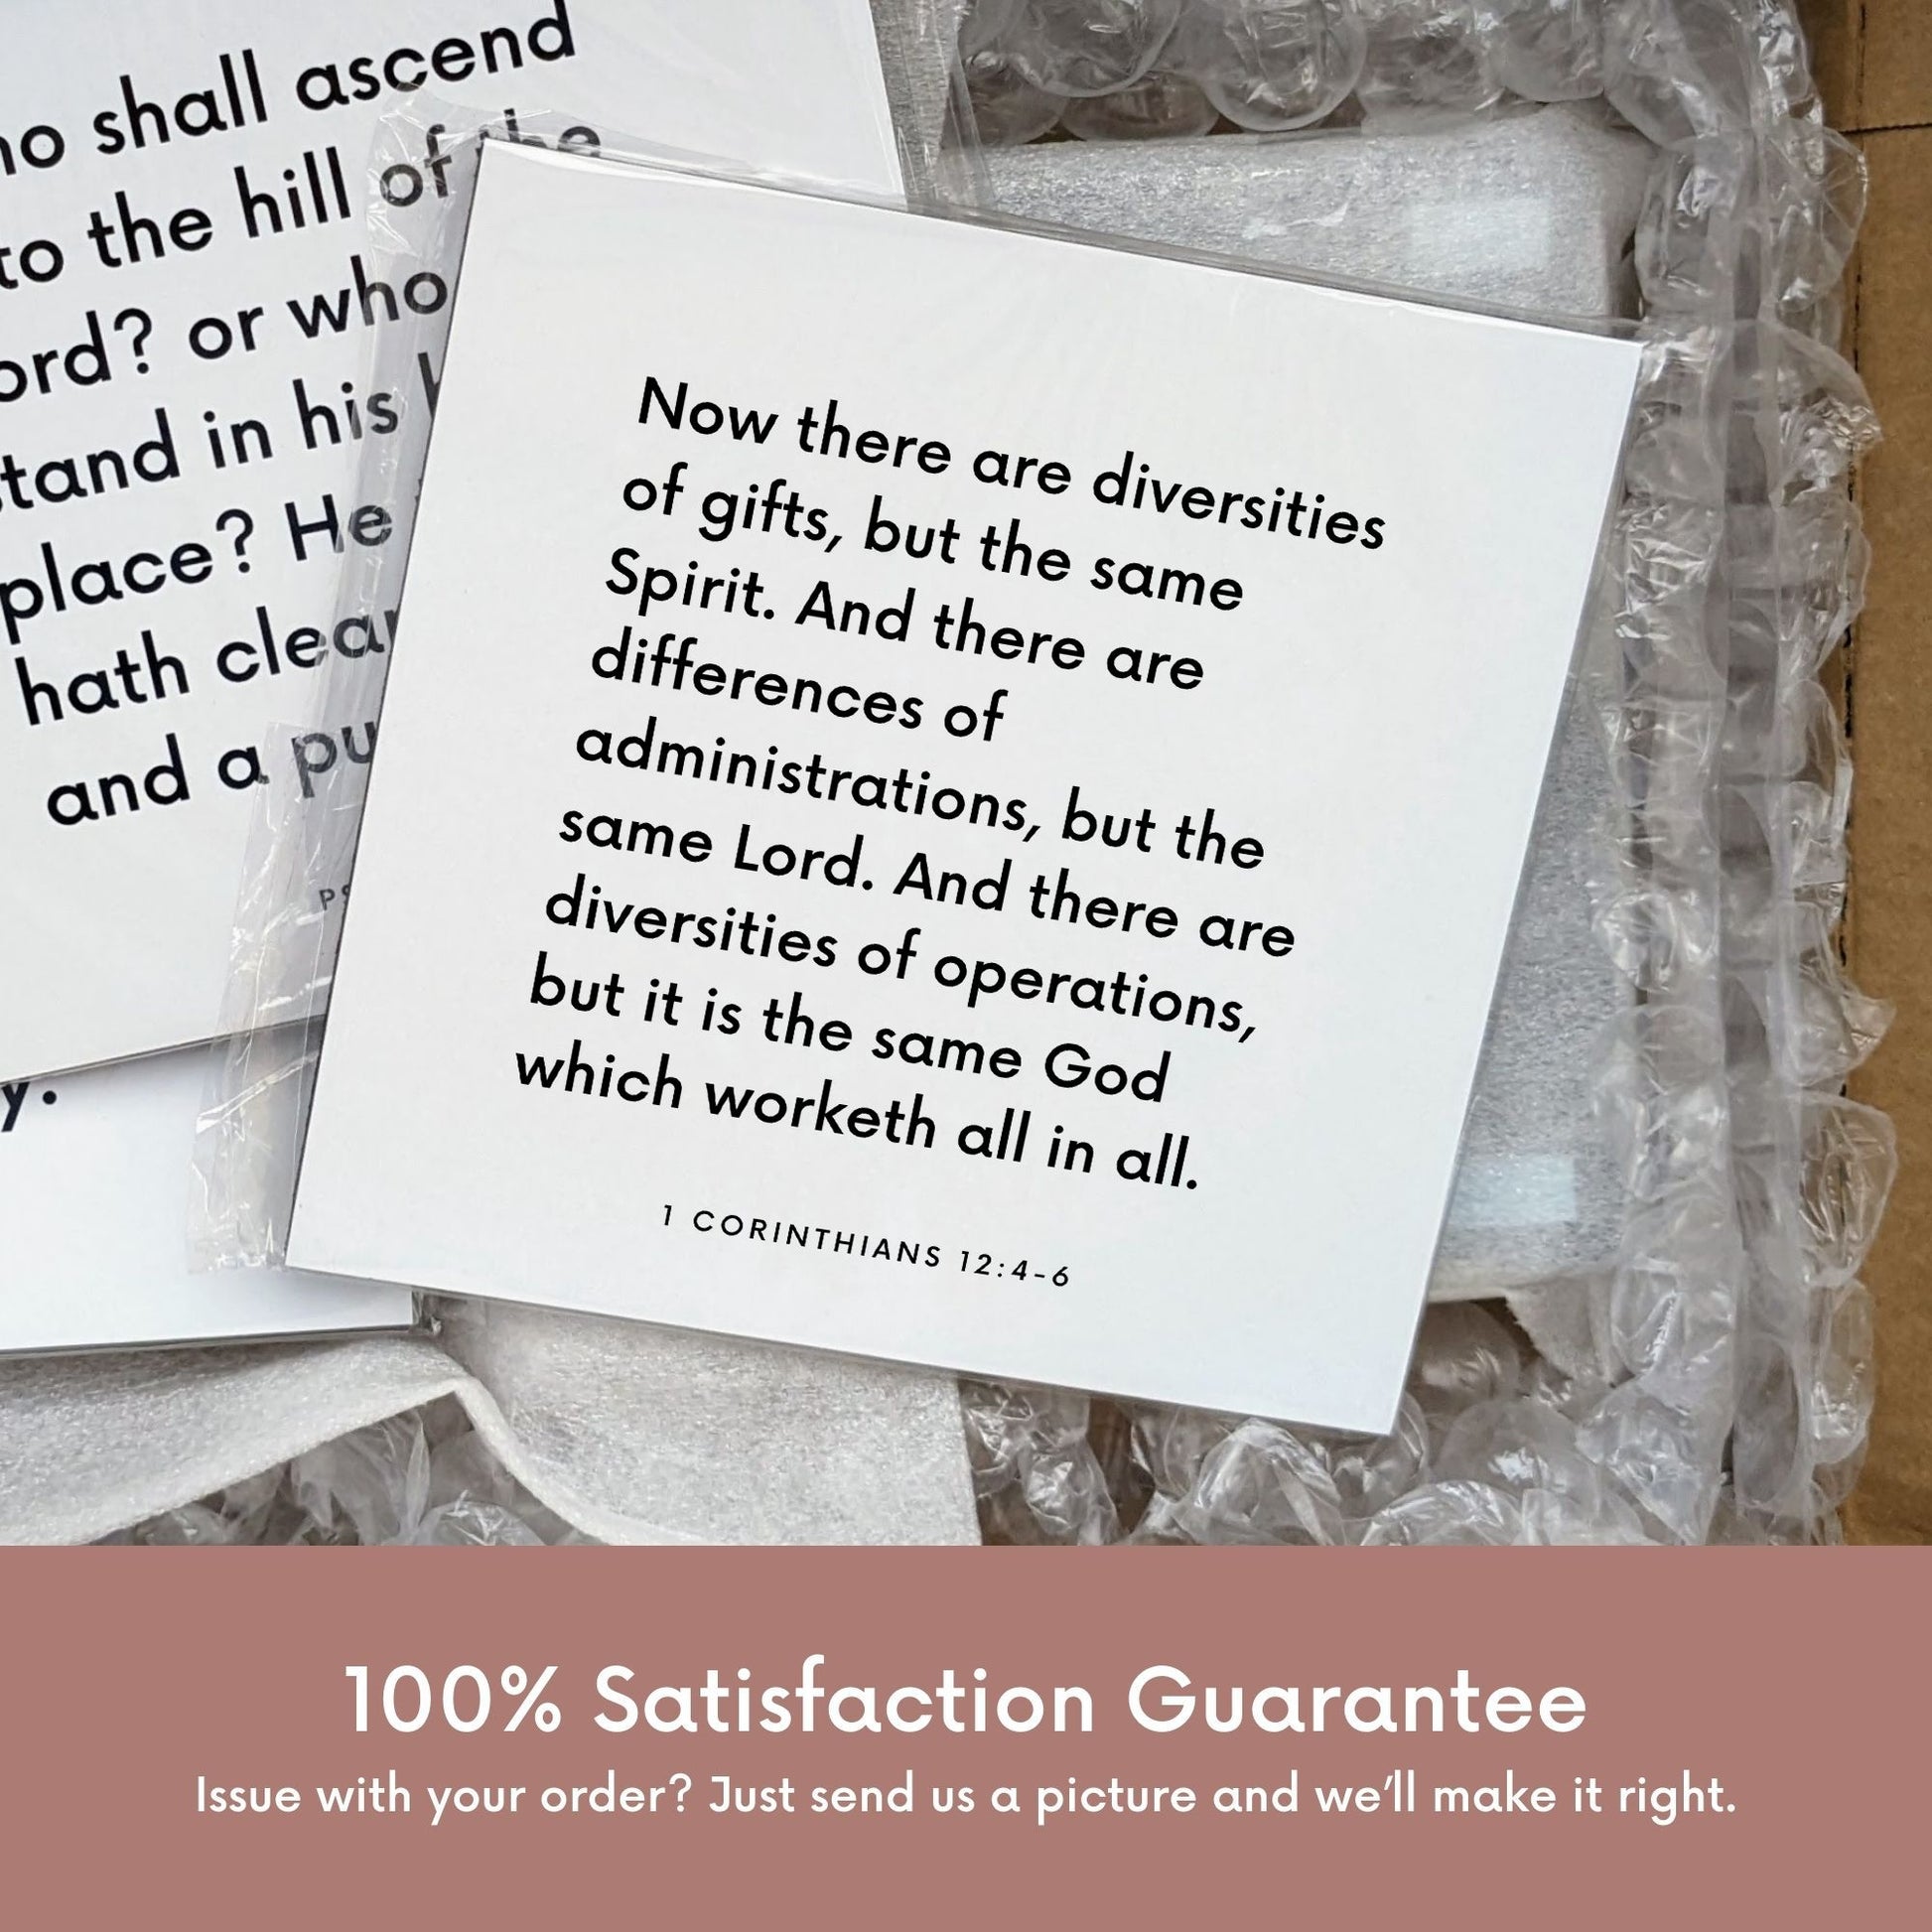 Shipping materials for scripture tile of 1 Corinthians 12:4-6 - "There are diversities of gifts, but the same Spirit"